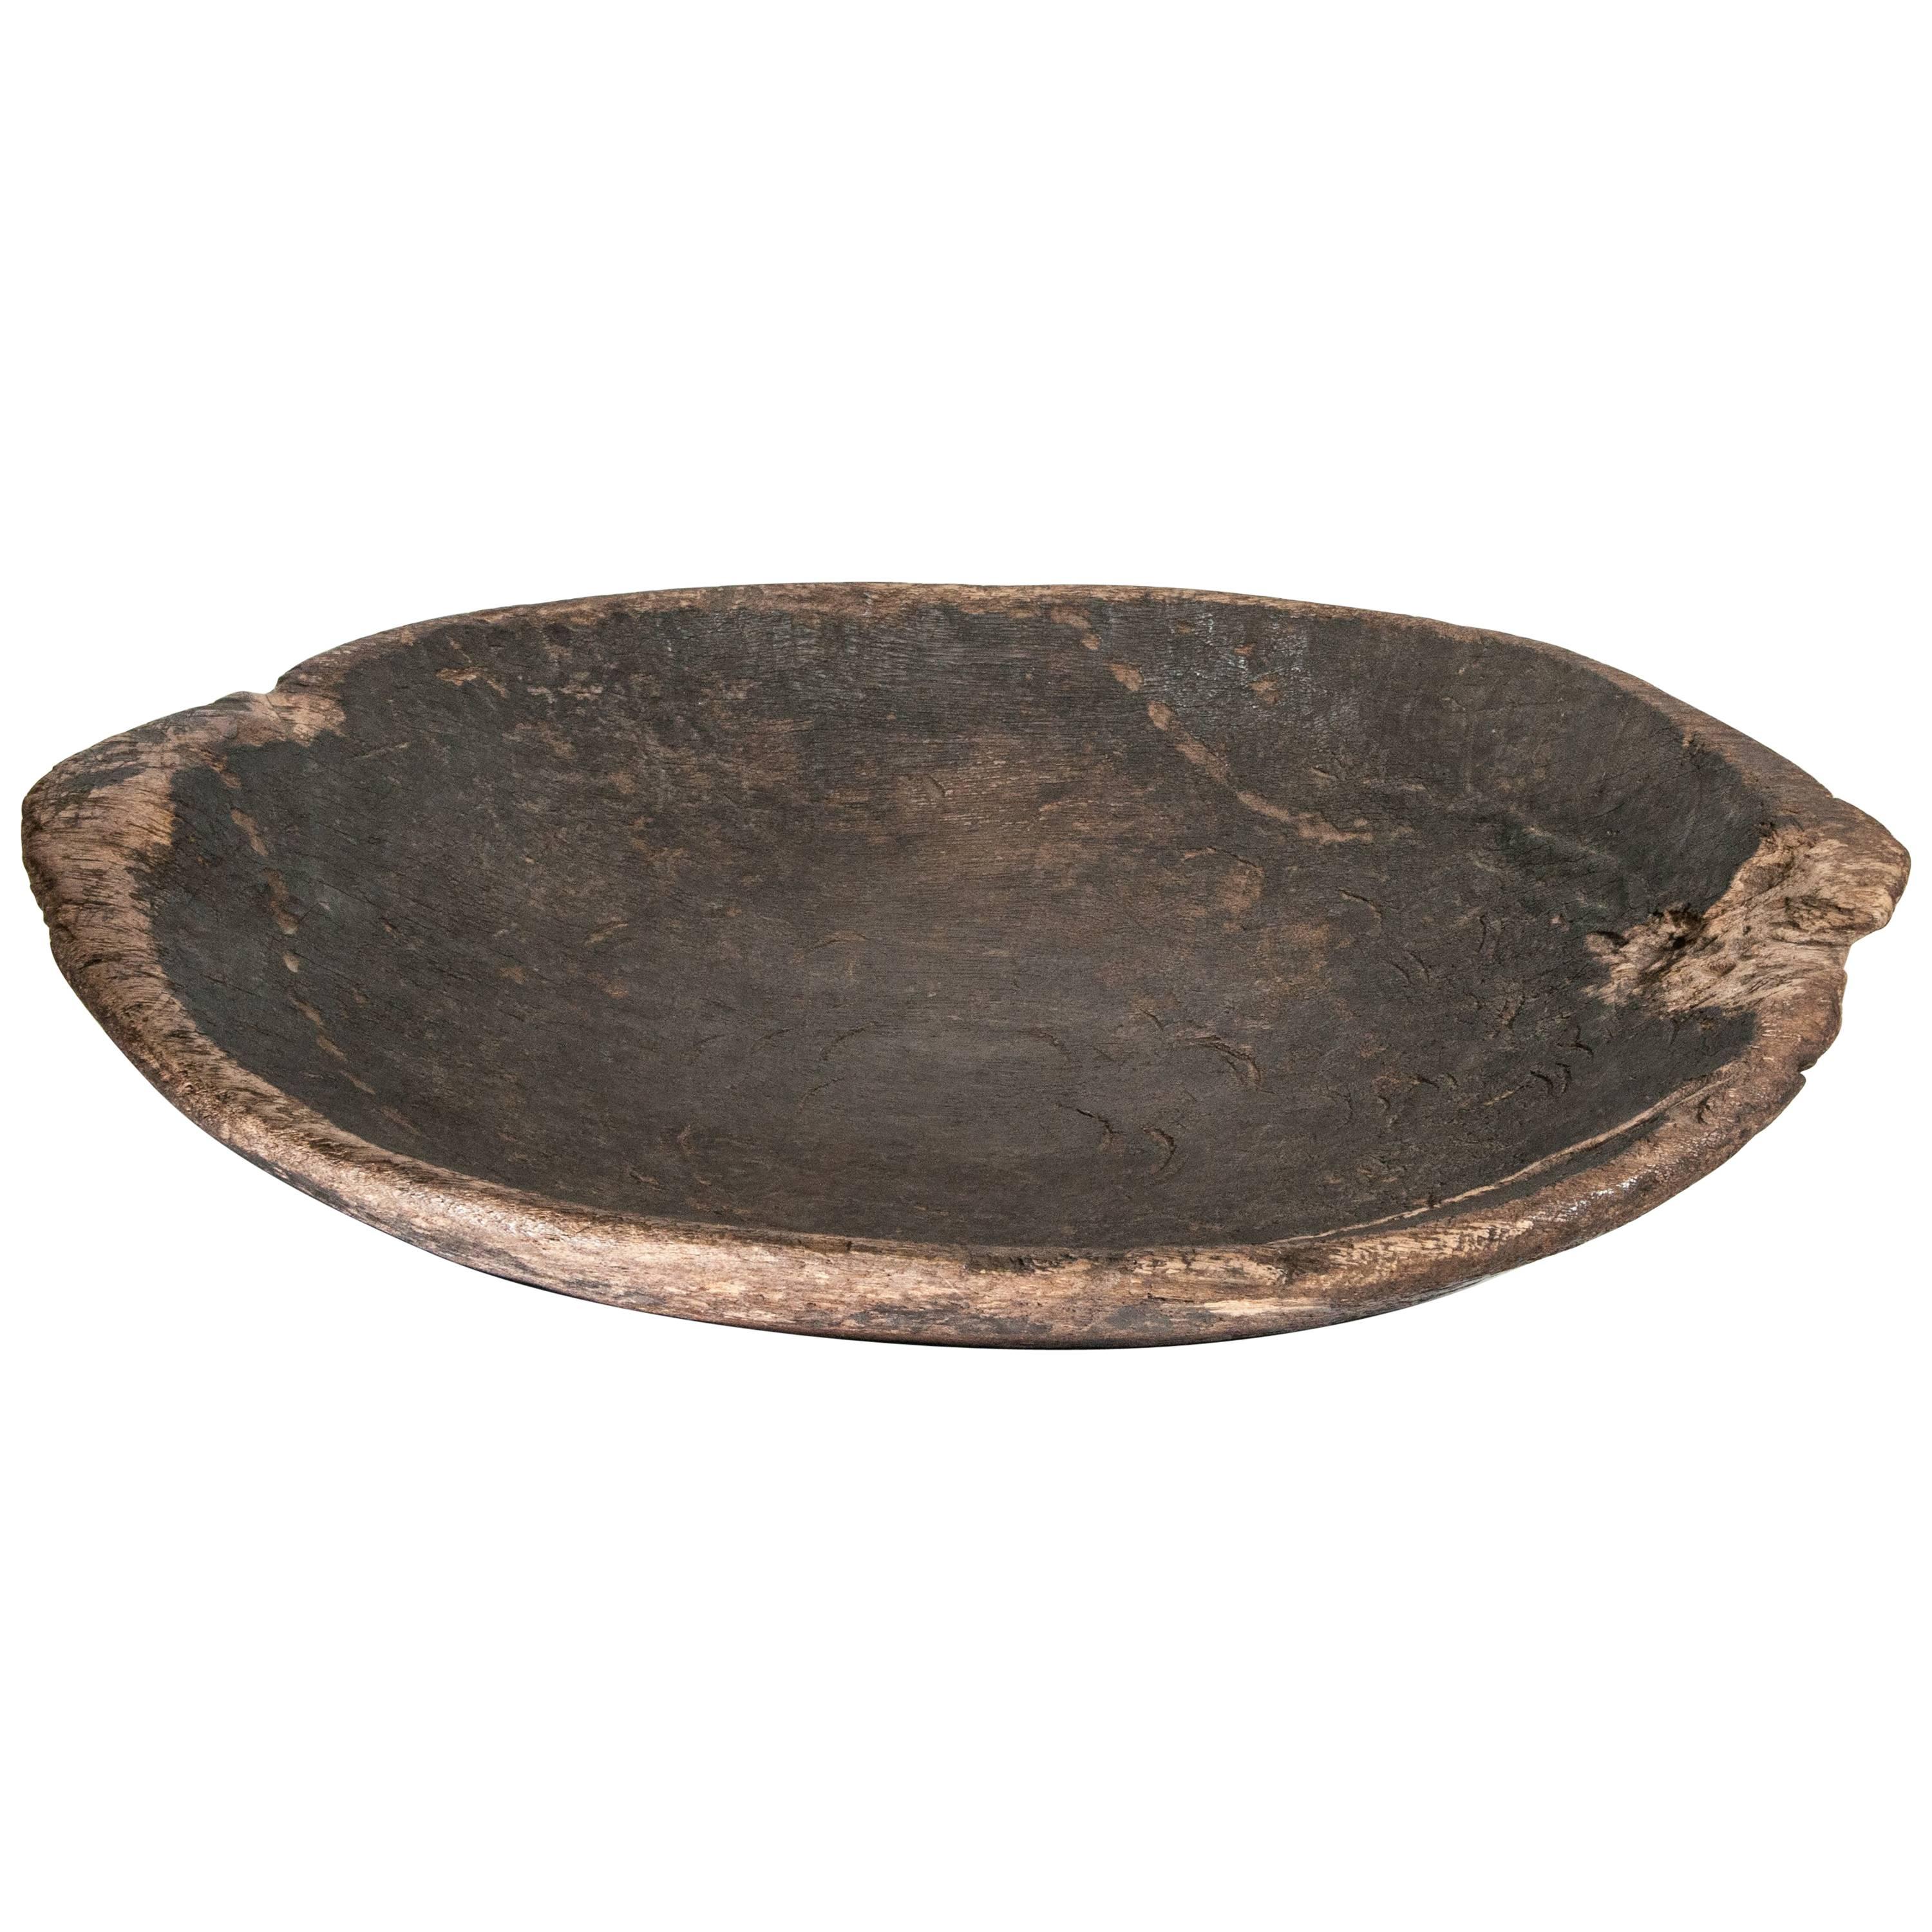 Tribal Hand Hewn Wooden Tray, Mentawai Island, Early to Mid-20th Century